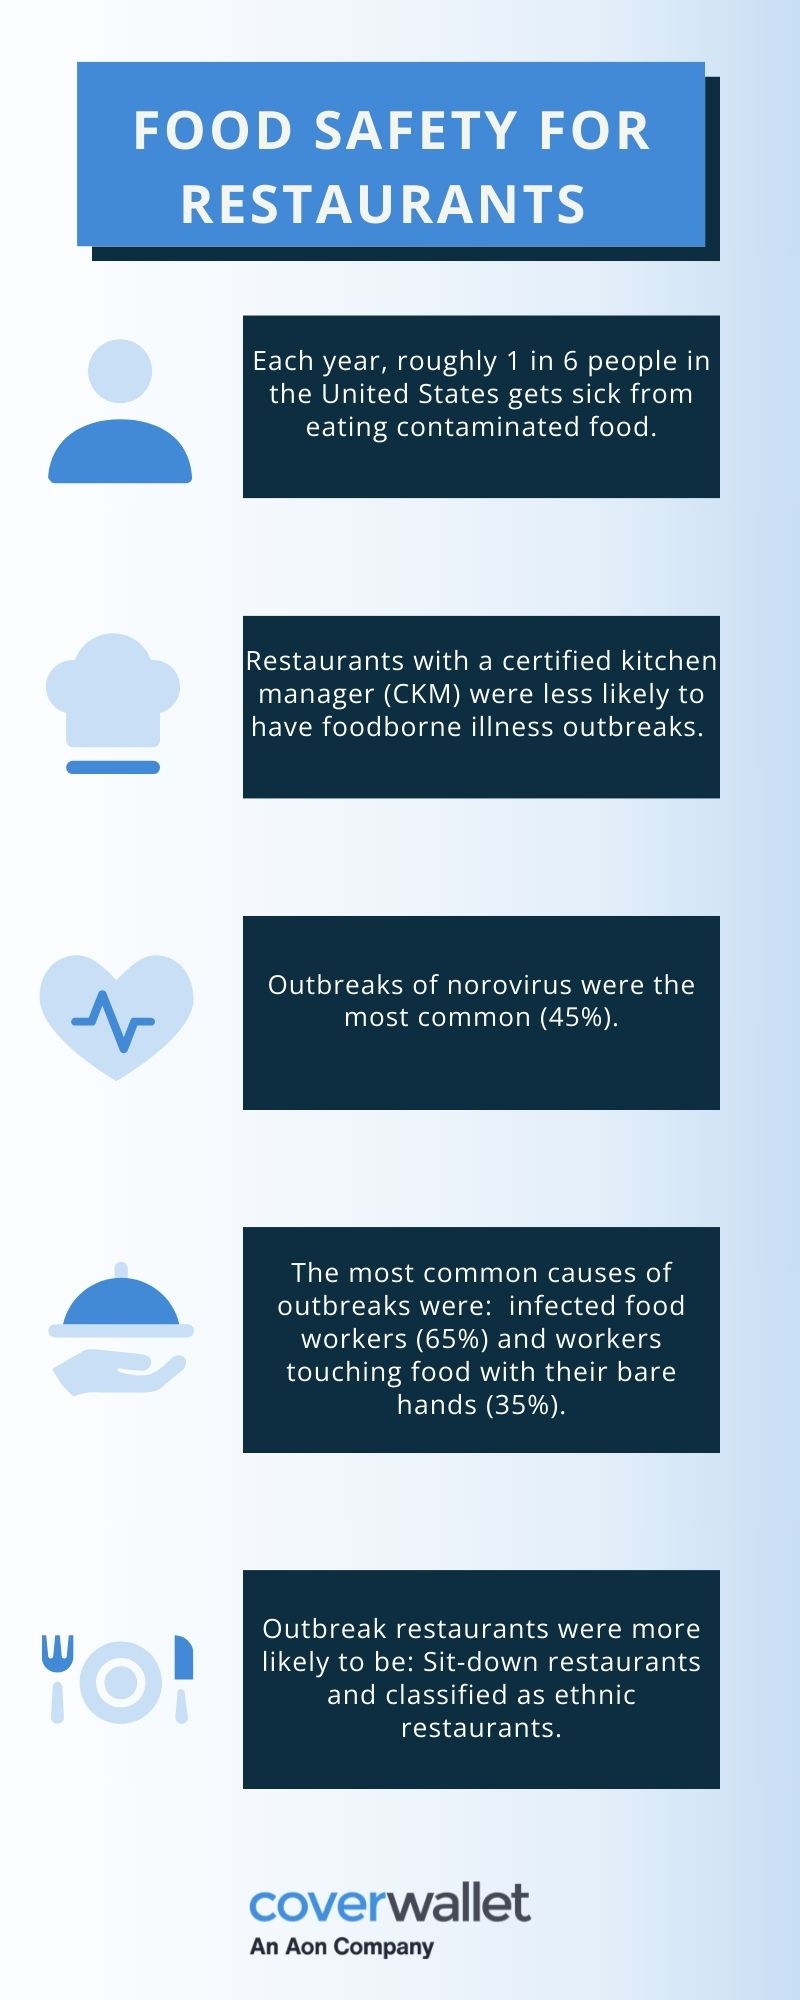 https://images.ctfassets.net/8edxnwlq2x0m/2krwv3Uj3s6lv4KfVnWciX/23502525c24a100bfd8a585377f22d42/Infographic_food_safety.jpg